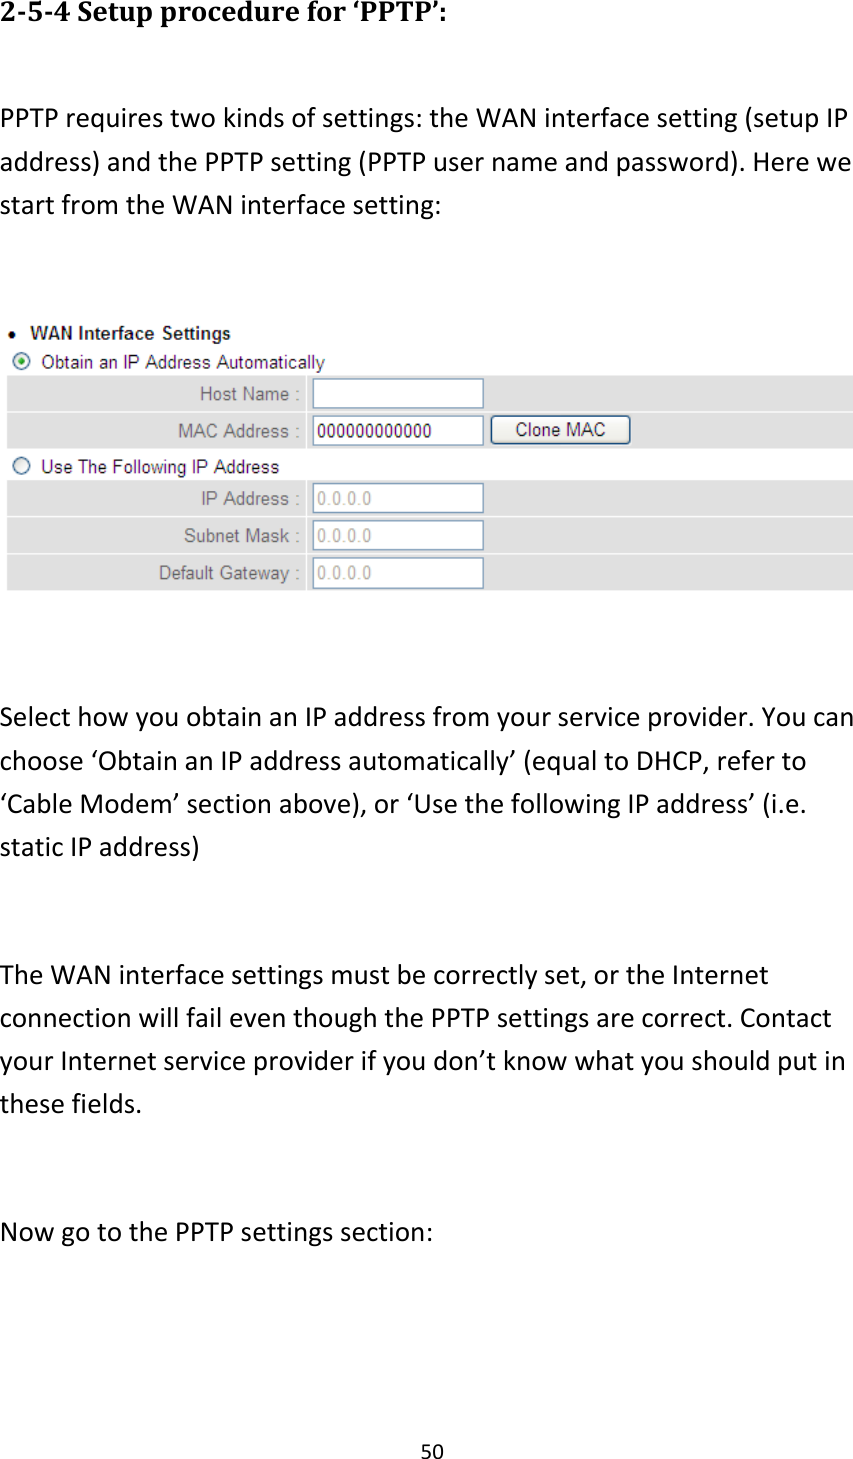 50 2-5-4 Setup procedure for ‘PPTP’:  PPTP requires two kinds of settings: the WAN interface setting (setup IP address) and the PPTP setting (PPTP user name and password). Here we start from the WAN interface setting:    Select how you obtain an IP address from your service provider. You can choose ‘Obtain an IP address automatically’ (equal to DHCP, refer to ‘Cable Modem’ section above), or ‘Use the following IP address’ (i.e. static IP address)  The WAN interface settings must be correctly set, or the Internet connection will fail even though the PPTP settings are correct. Contact your Internet service provider if you don’t know what you should put in these fields.  Now go to the PPTP settings section:  